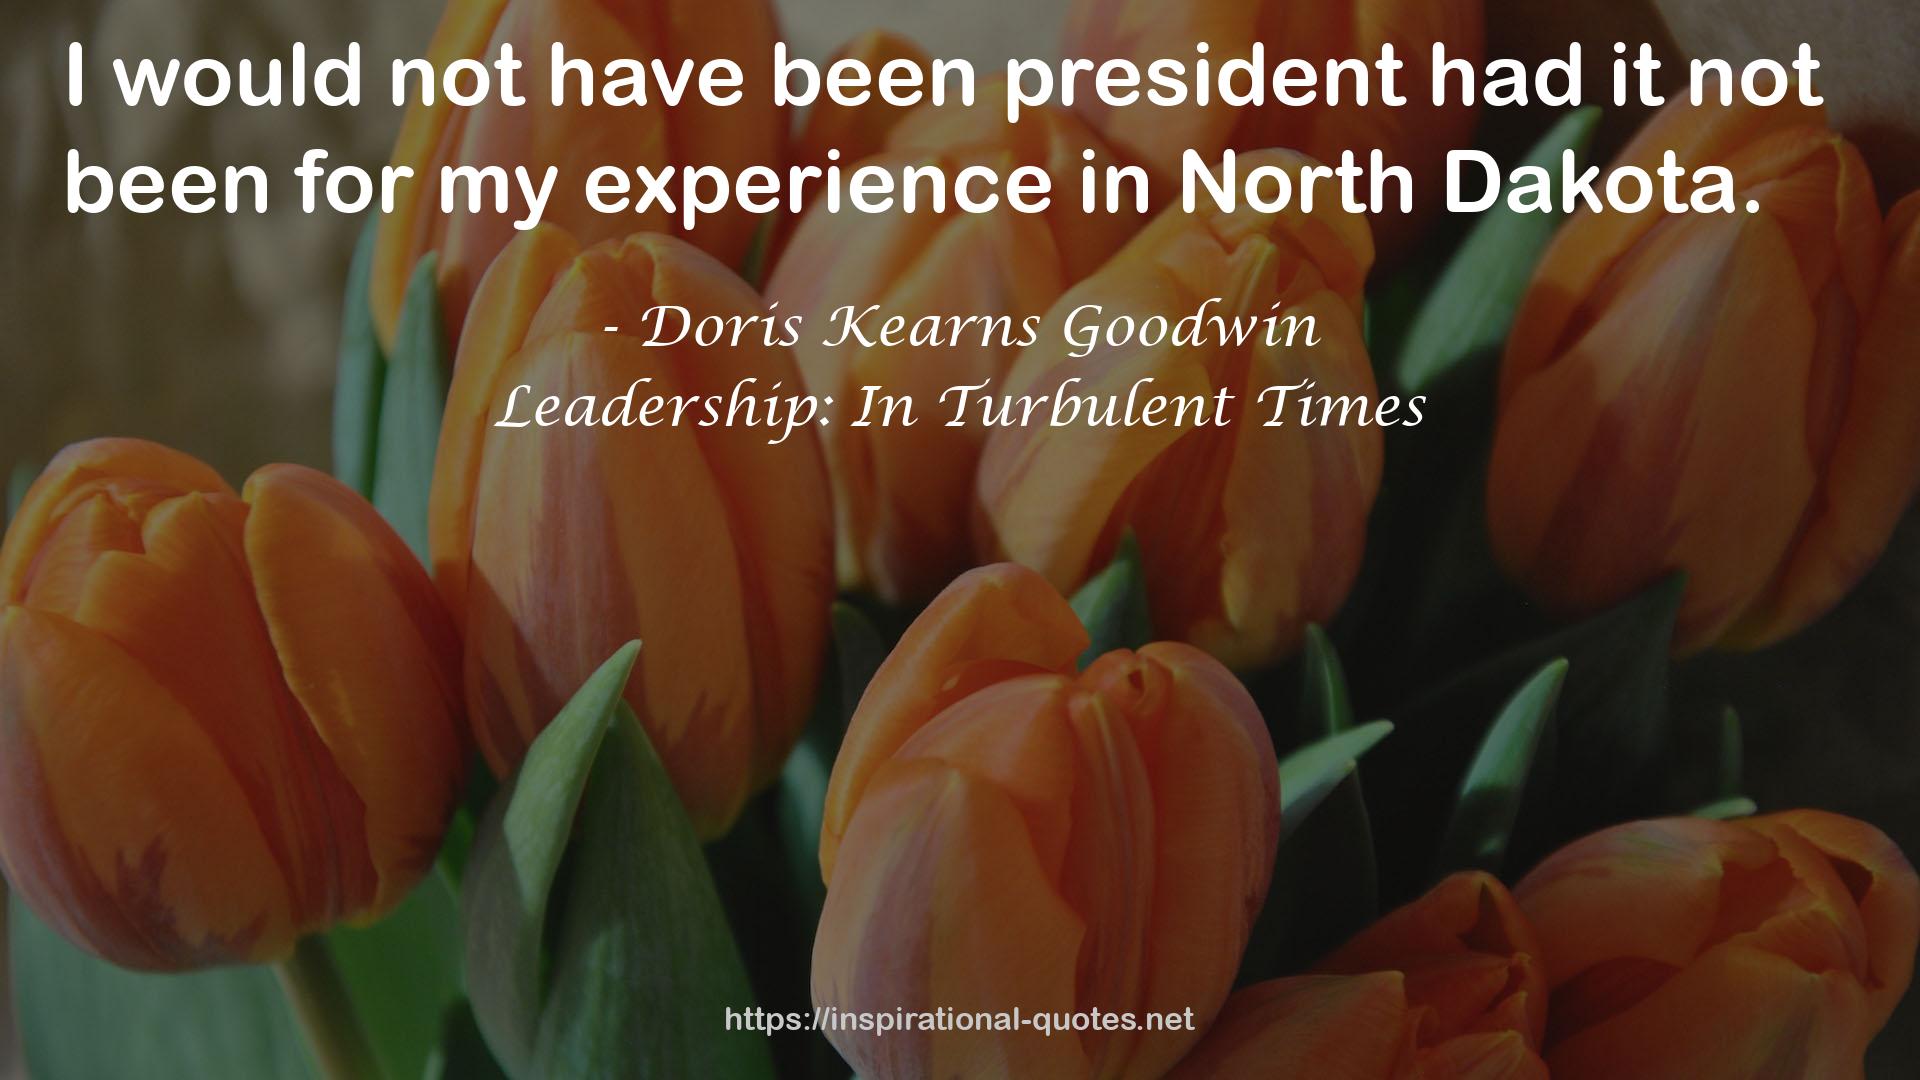 Leadership: In Turbulent Times QUOTES